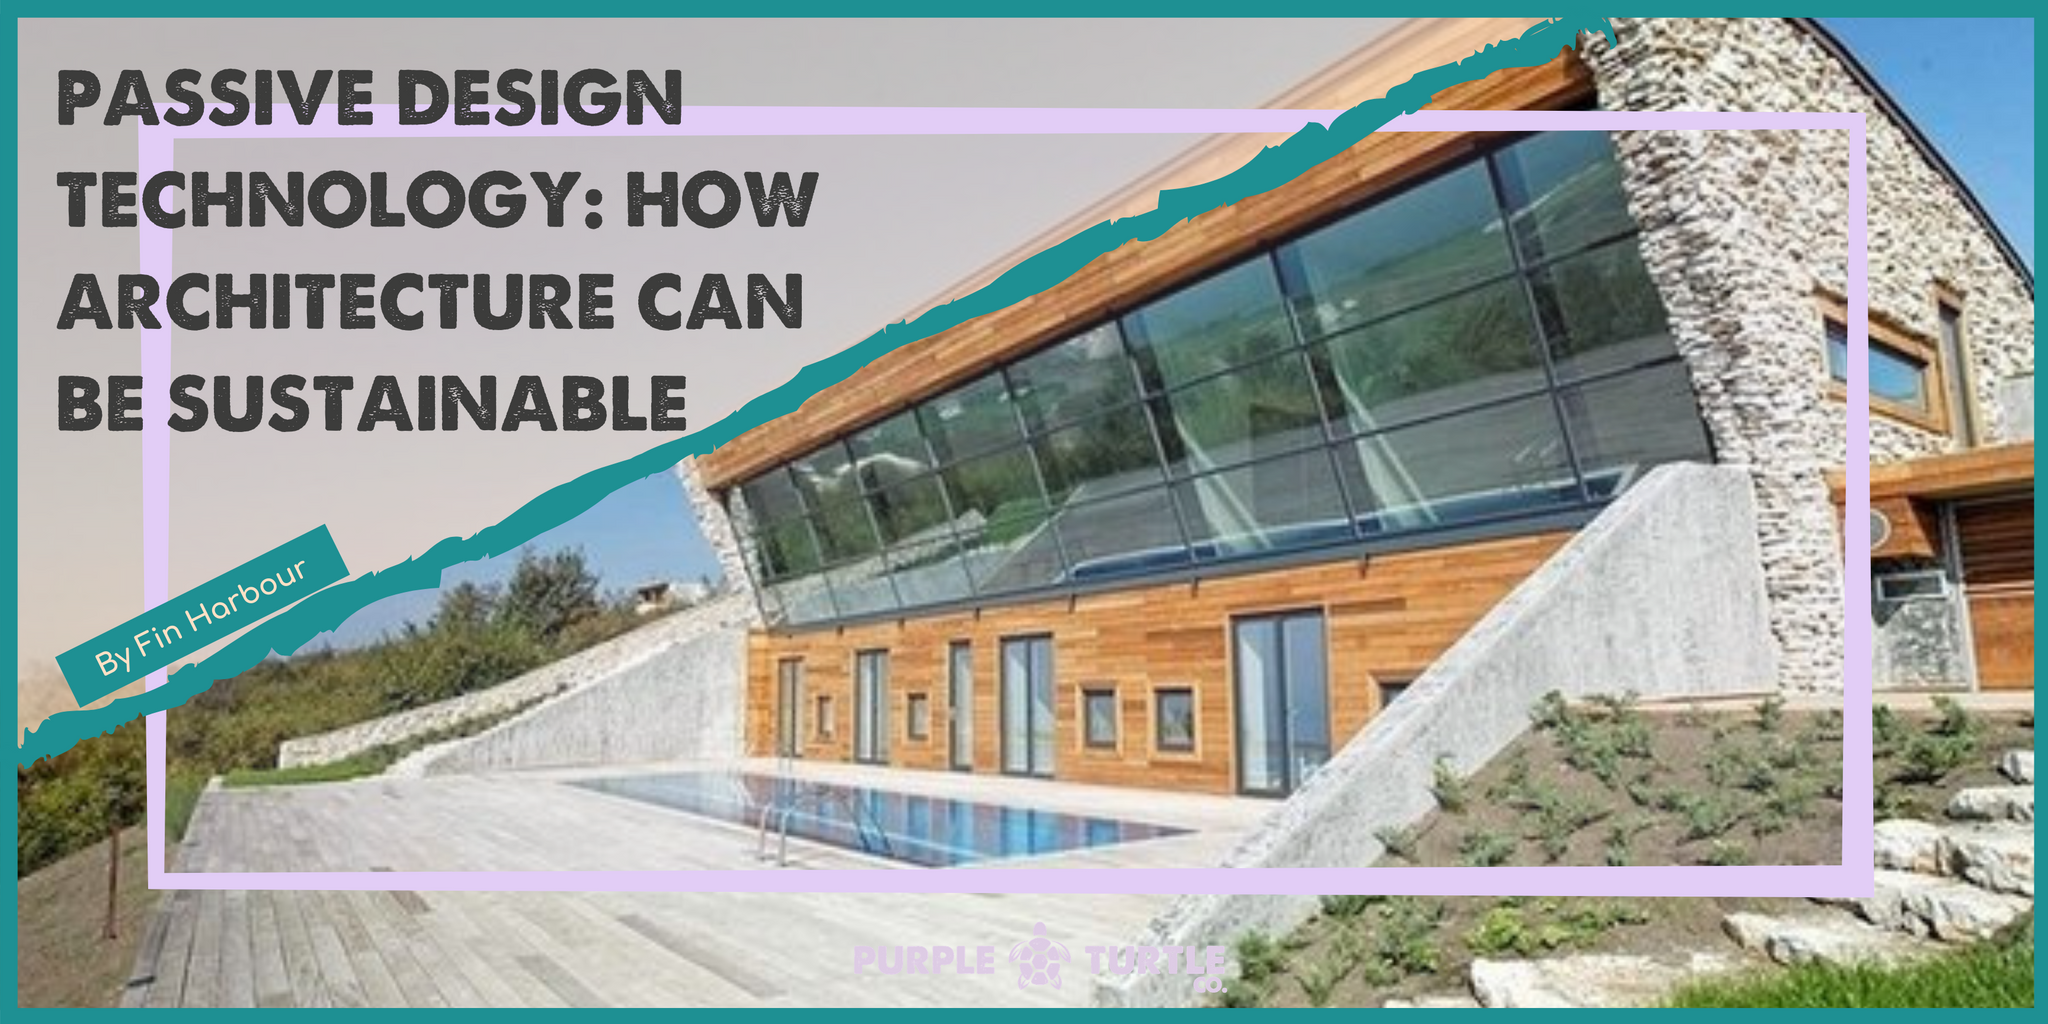 Passive Design Technology: How architecture can be sustainable